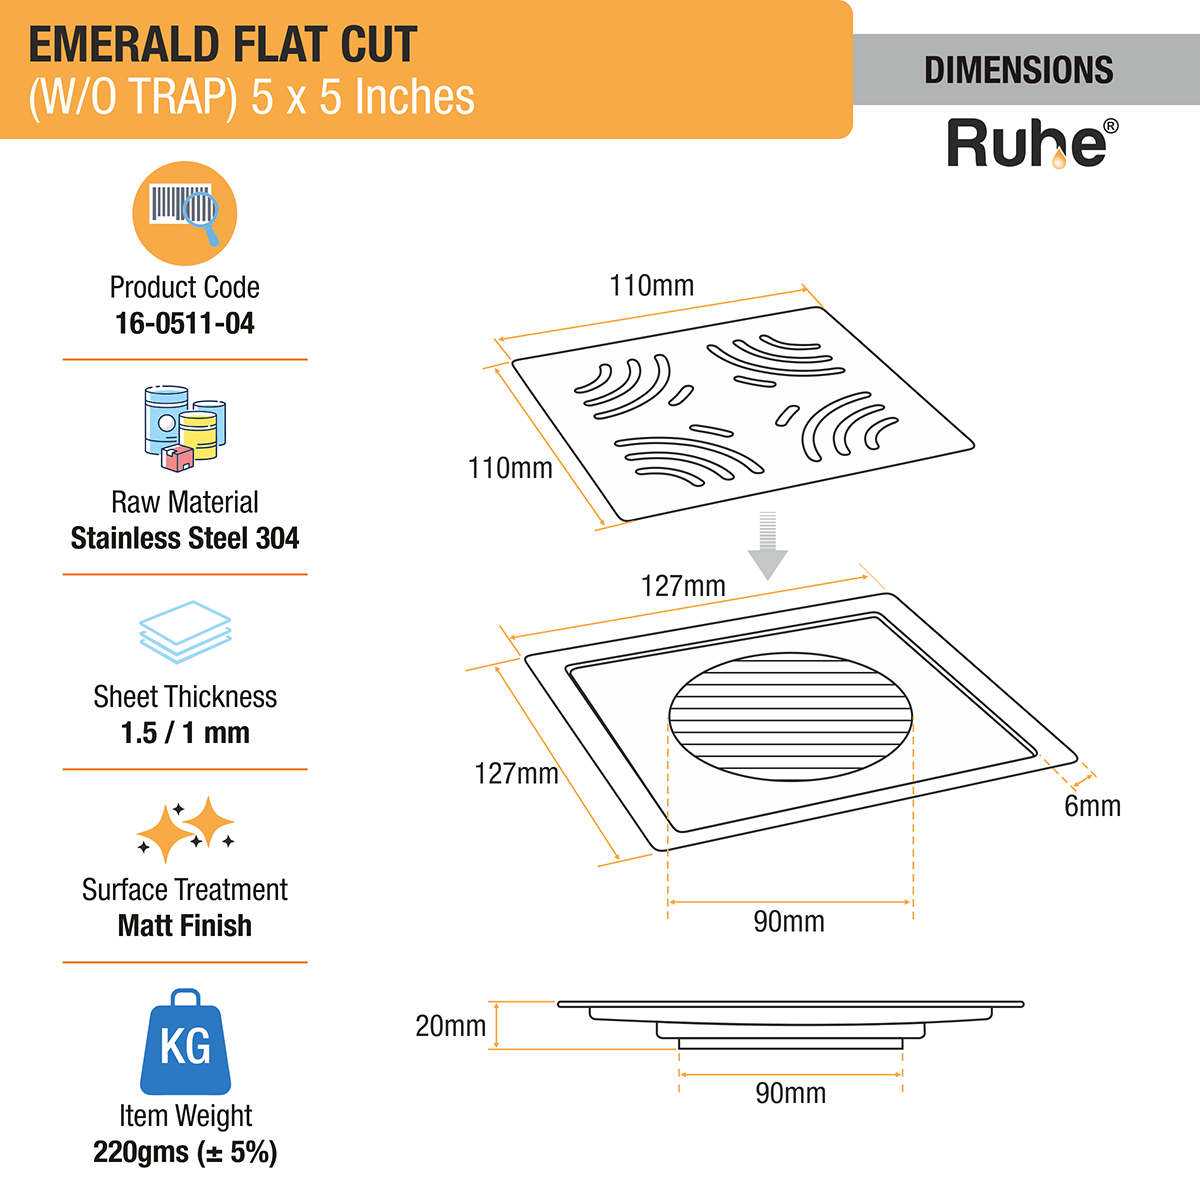 Emerald Square Flat Cut 304-Grade Floor Drain (5 x 5 Inches) dimensions and sizes